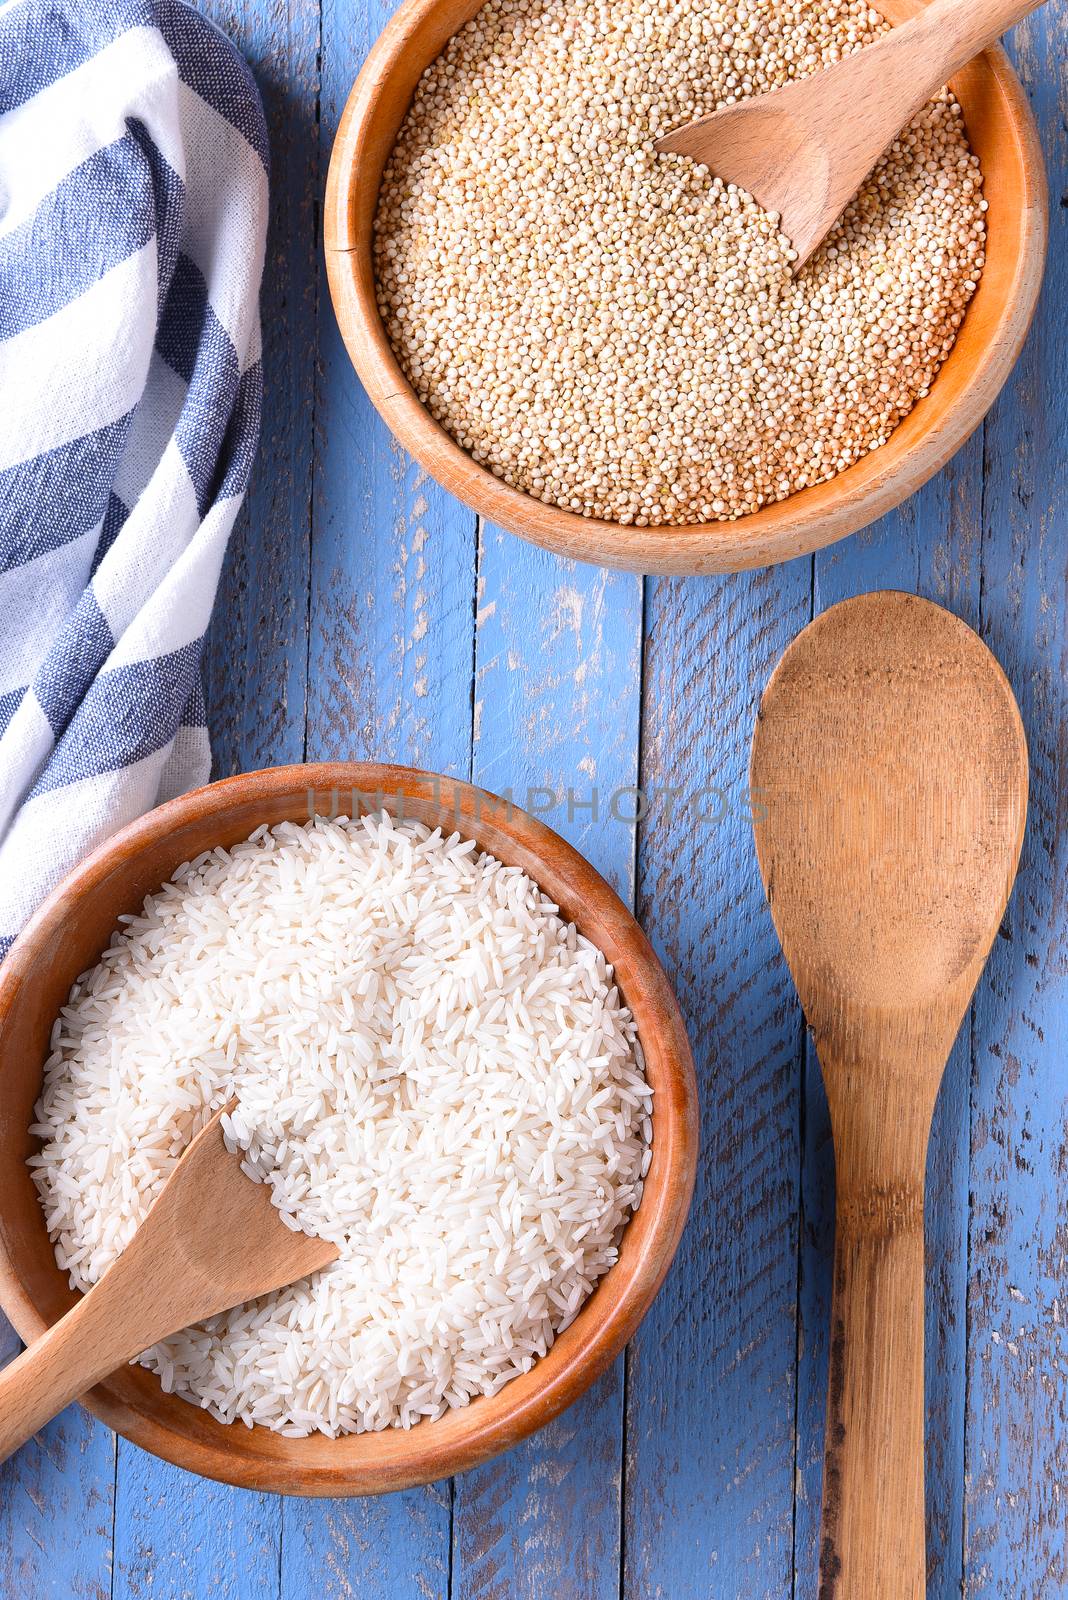 Top view of rice and quinoa in wooden bowls on a blue wood table.